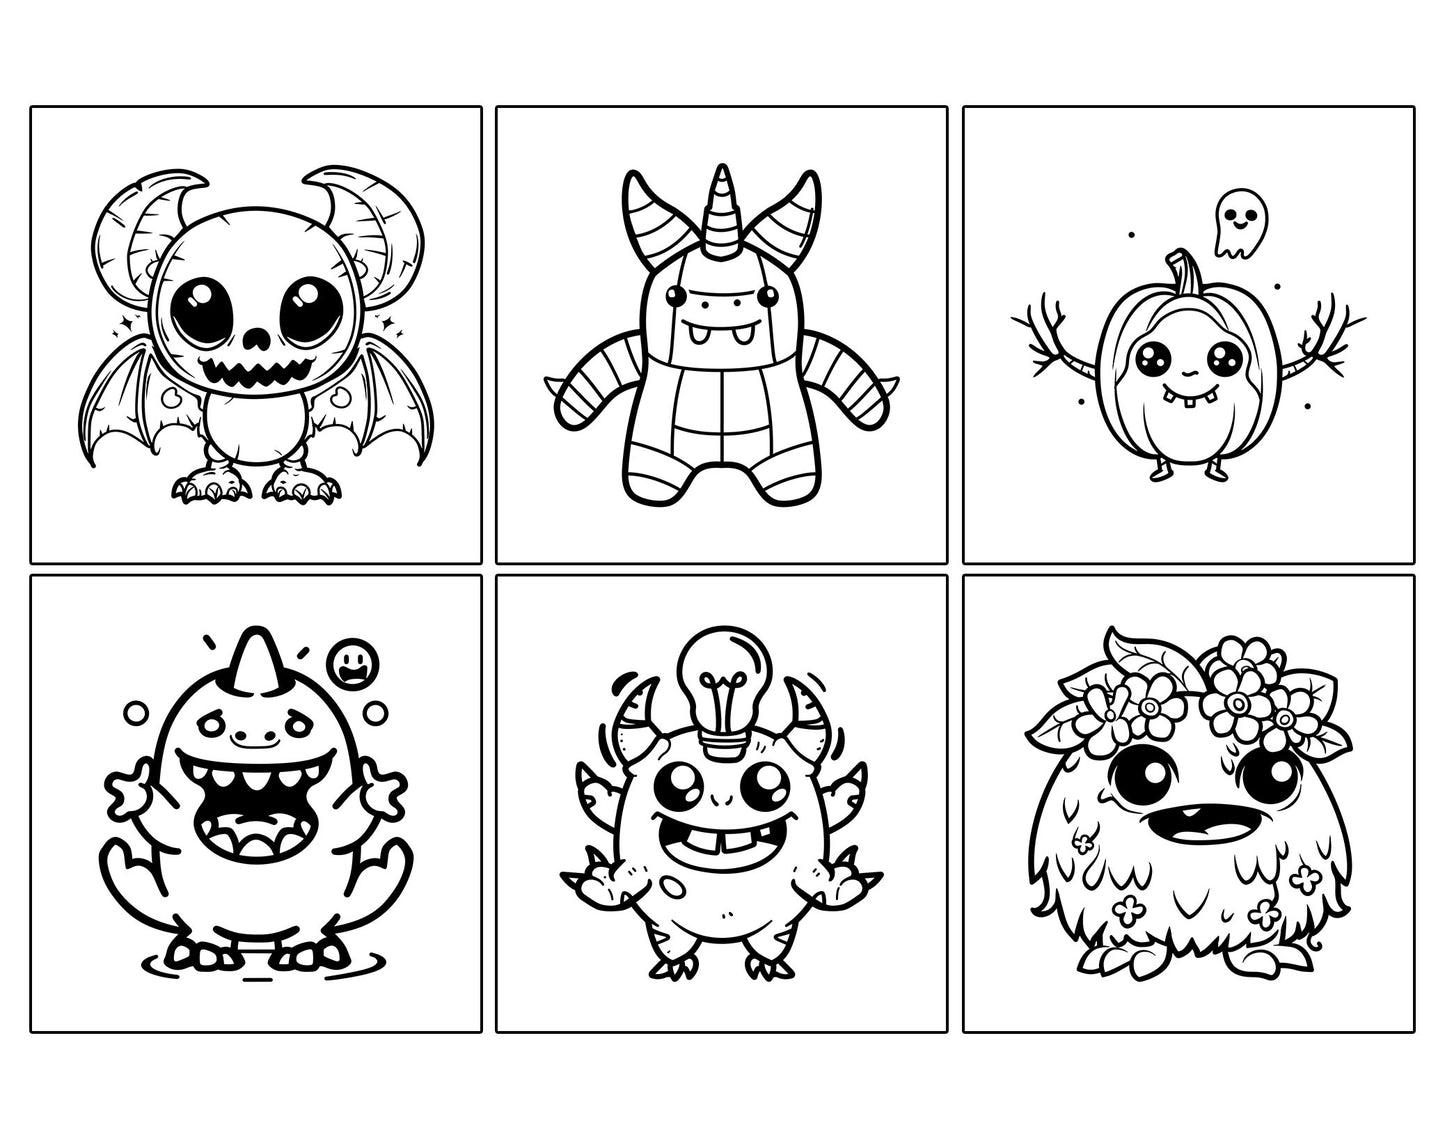 60 Kawaii Monsters Cute & Simple Coloring Pages - Instant Download - Printable PDF